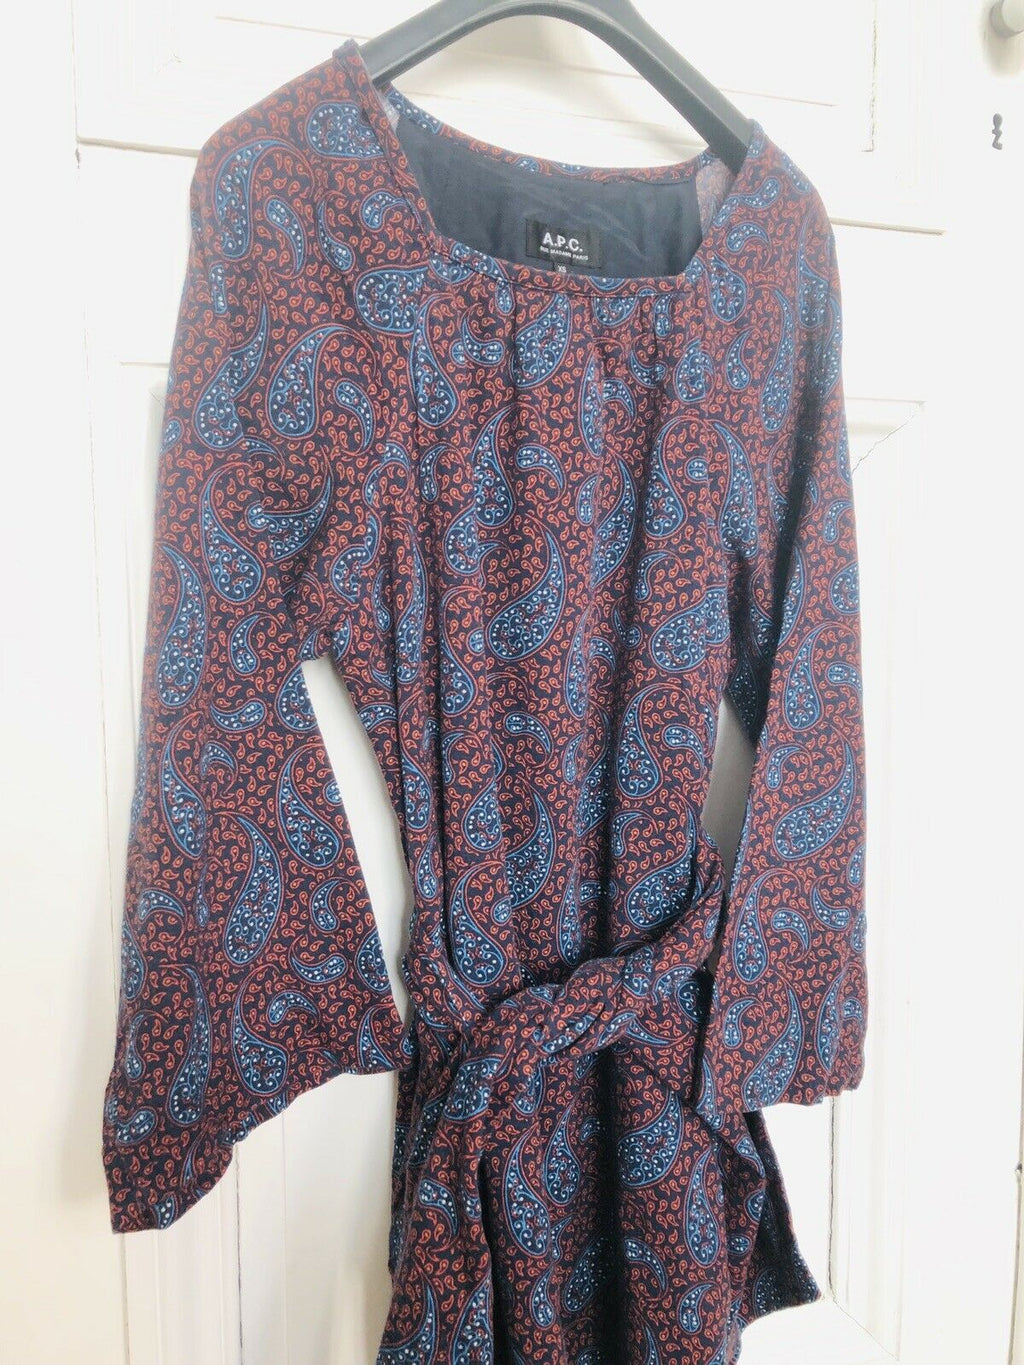 A.P.C. Paisley Belted Dress Size XS